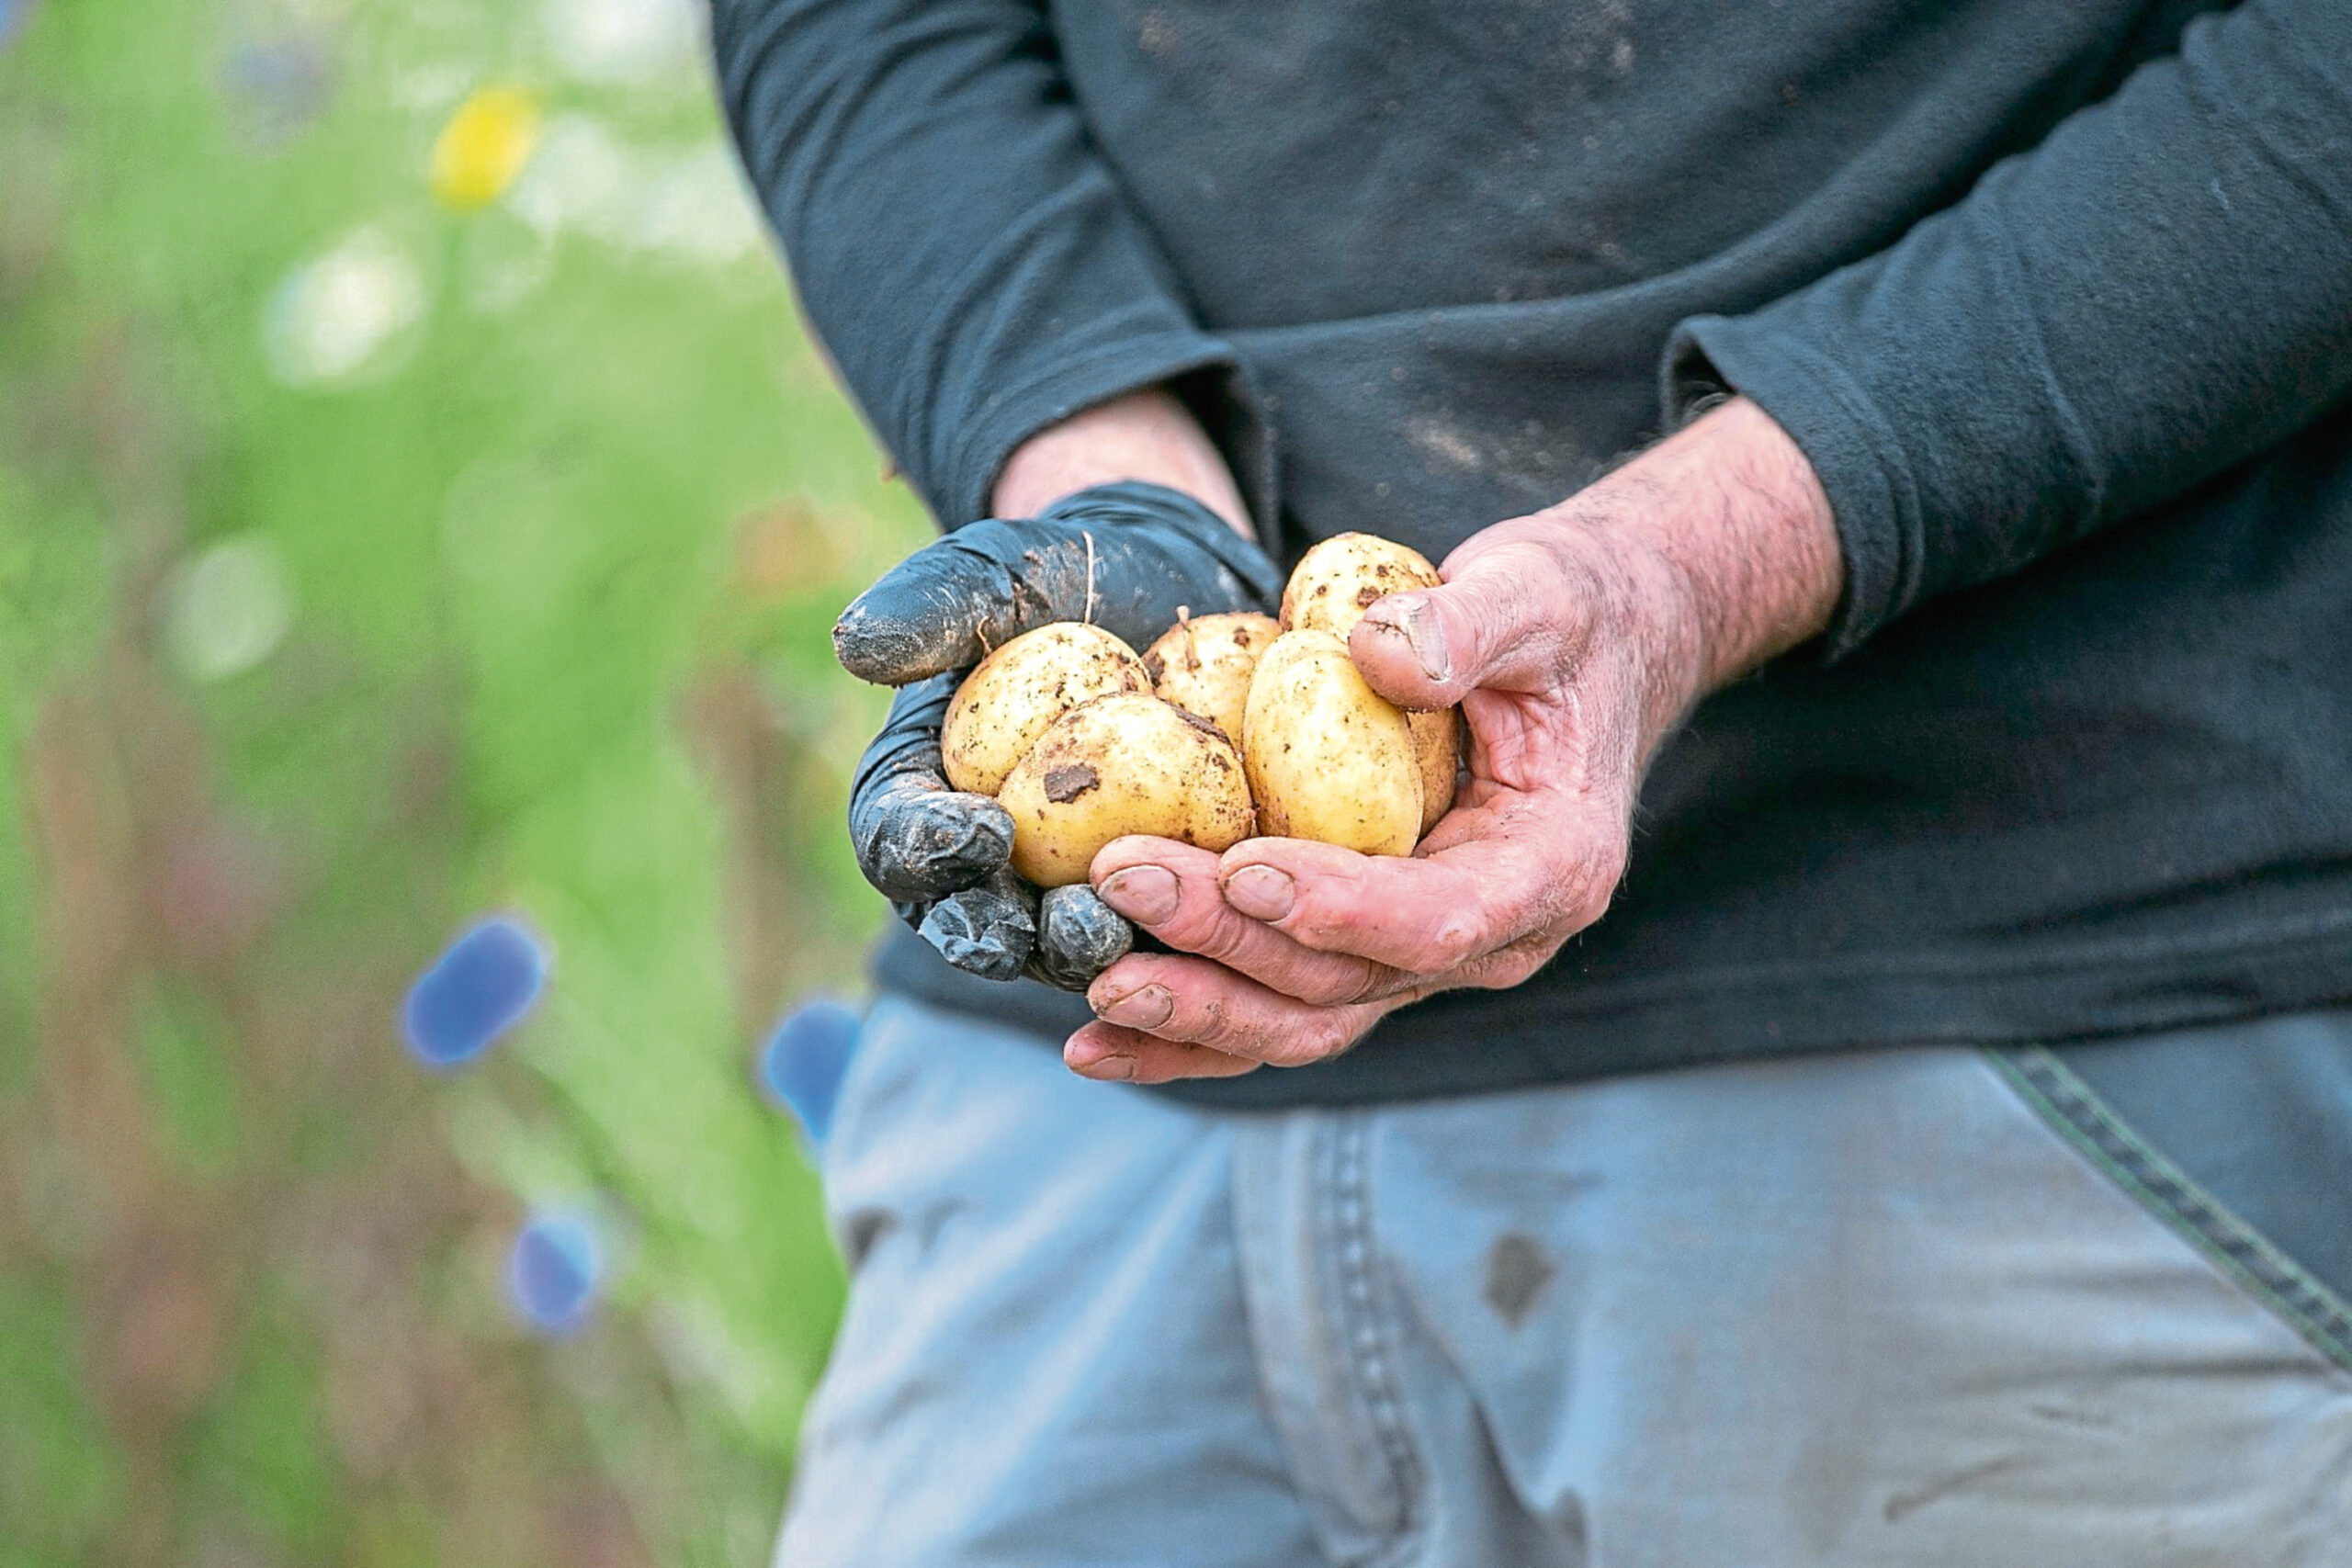 "The Golden Wonders truly named, While other brands are just as famed In life today, No other type of food is able, To oust the tattie from our table, So, we must pay." Picture by Kim Cessford / DCT Media.